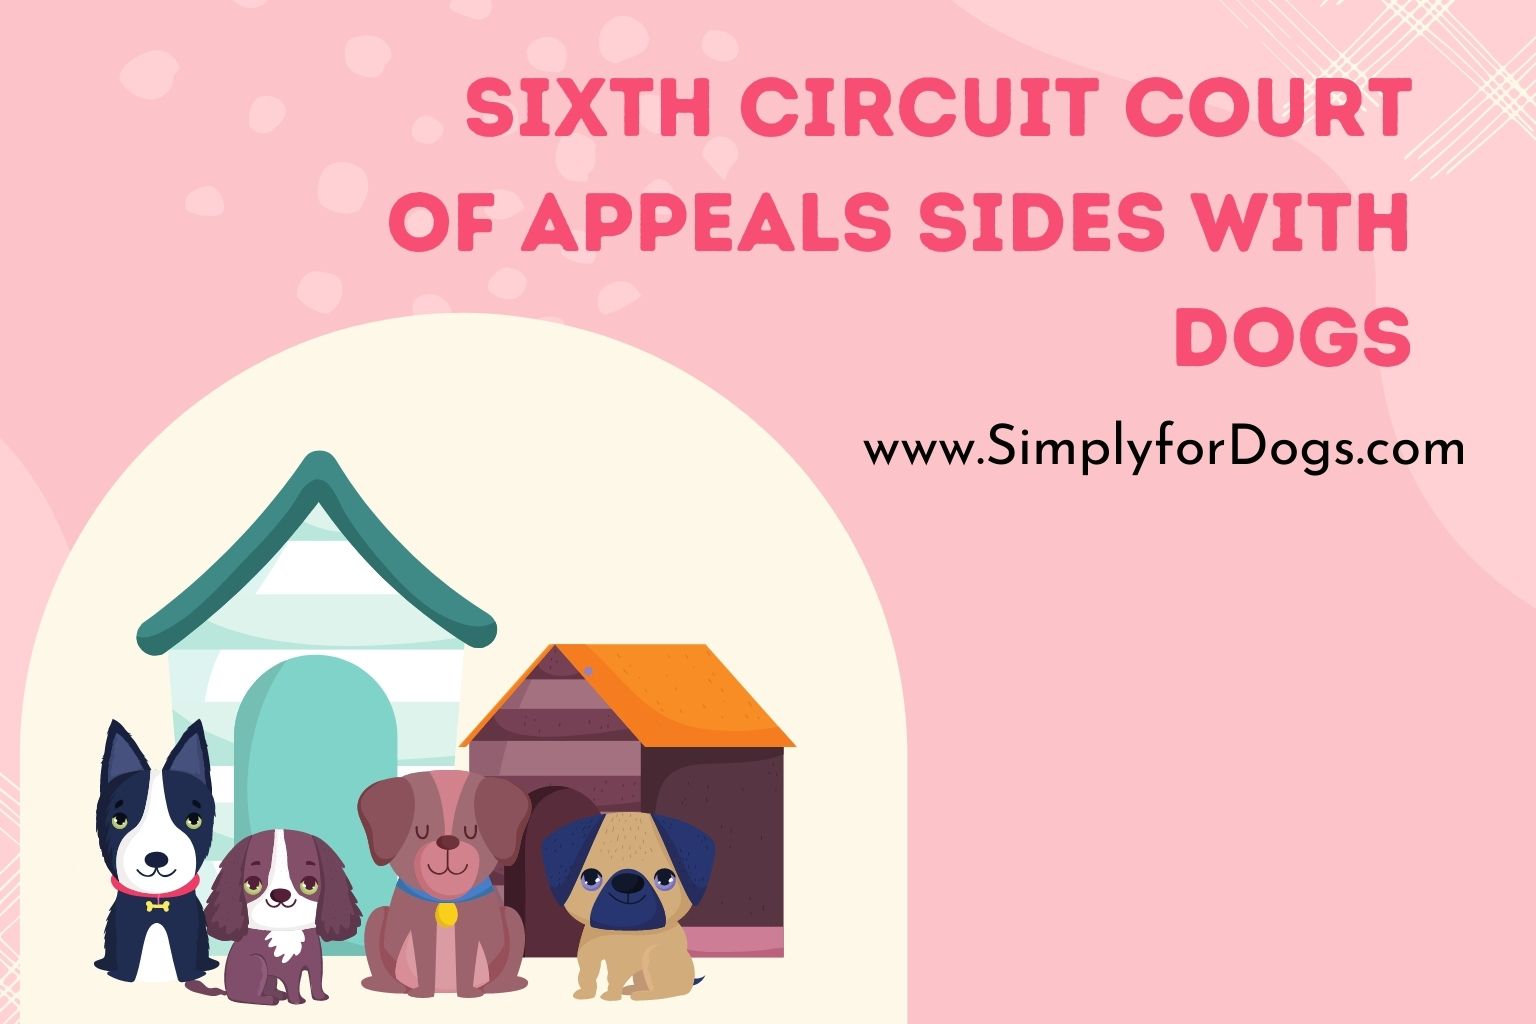 Sixth Circuit Court of Appeals Sides With Dogs